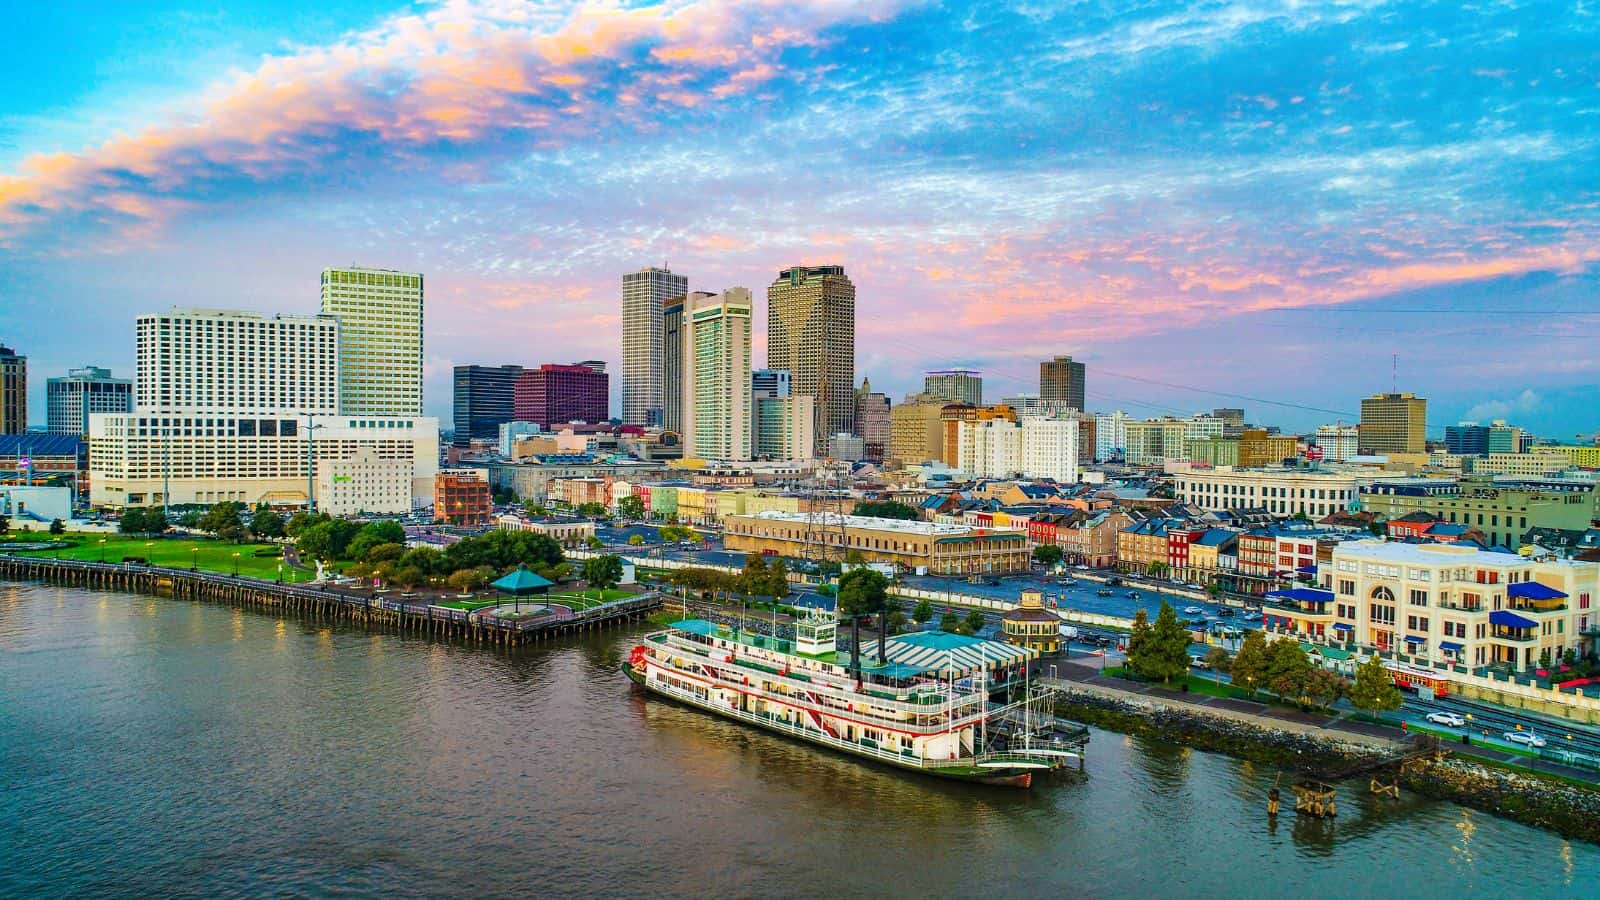 <p>New Orleans is one of the five most popular locations for spring break activities, but the <a href="https://nypost.com/2024/02/08/lifestyle/new-orleans-named-most-popular-least-safe-spring-break-spot/">New York Post</a> calls it the least safe. This city’s tourist population is a target for petty criminals, and Pine Village is regarded as its most dangerous neighborhood. It’s certainly worth visiting, but be careful!</p>